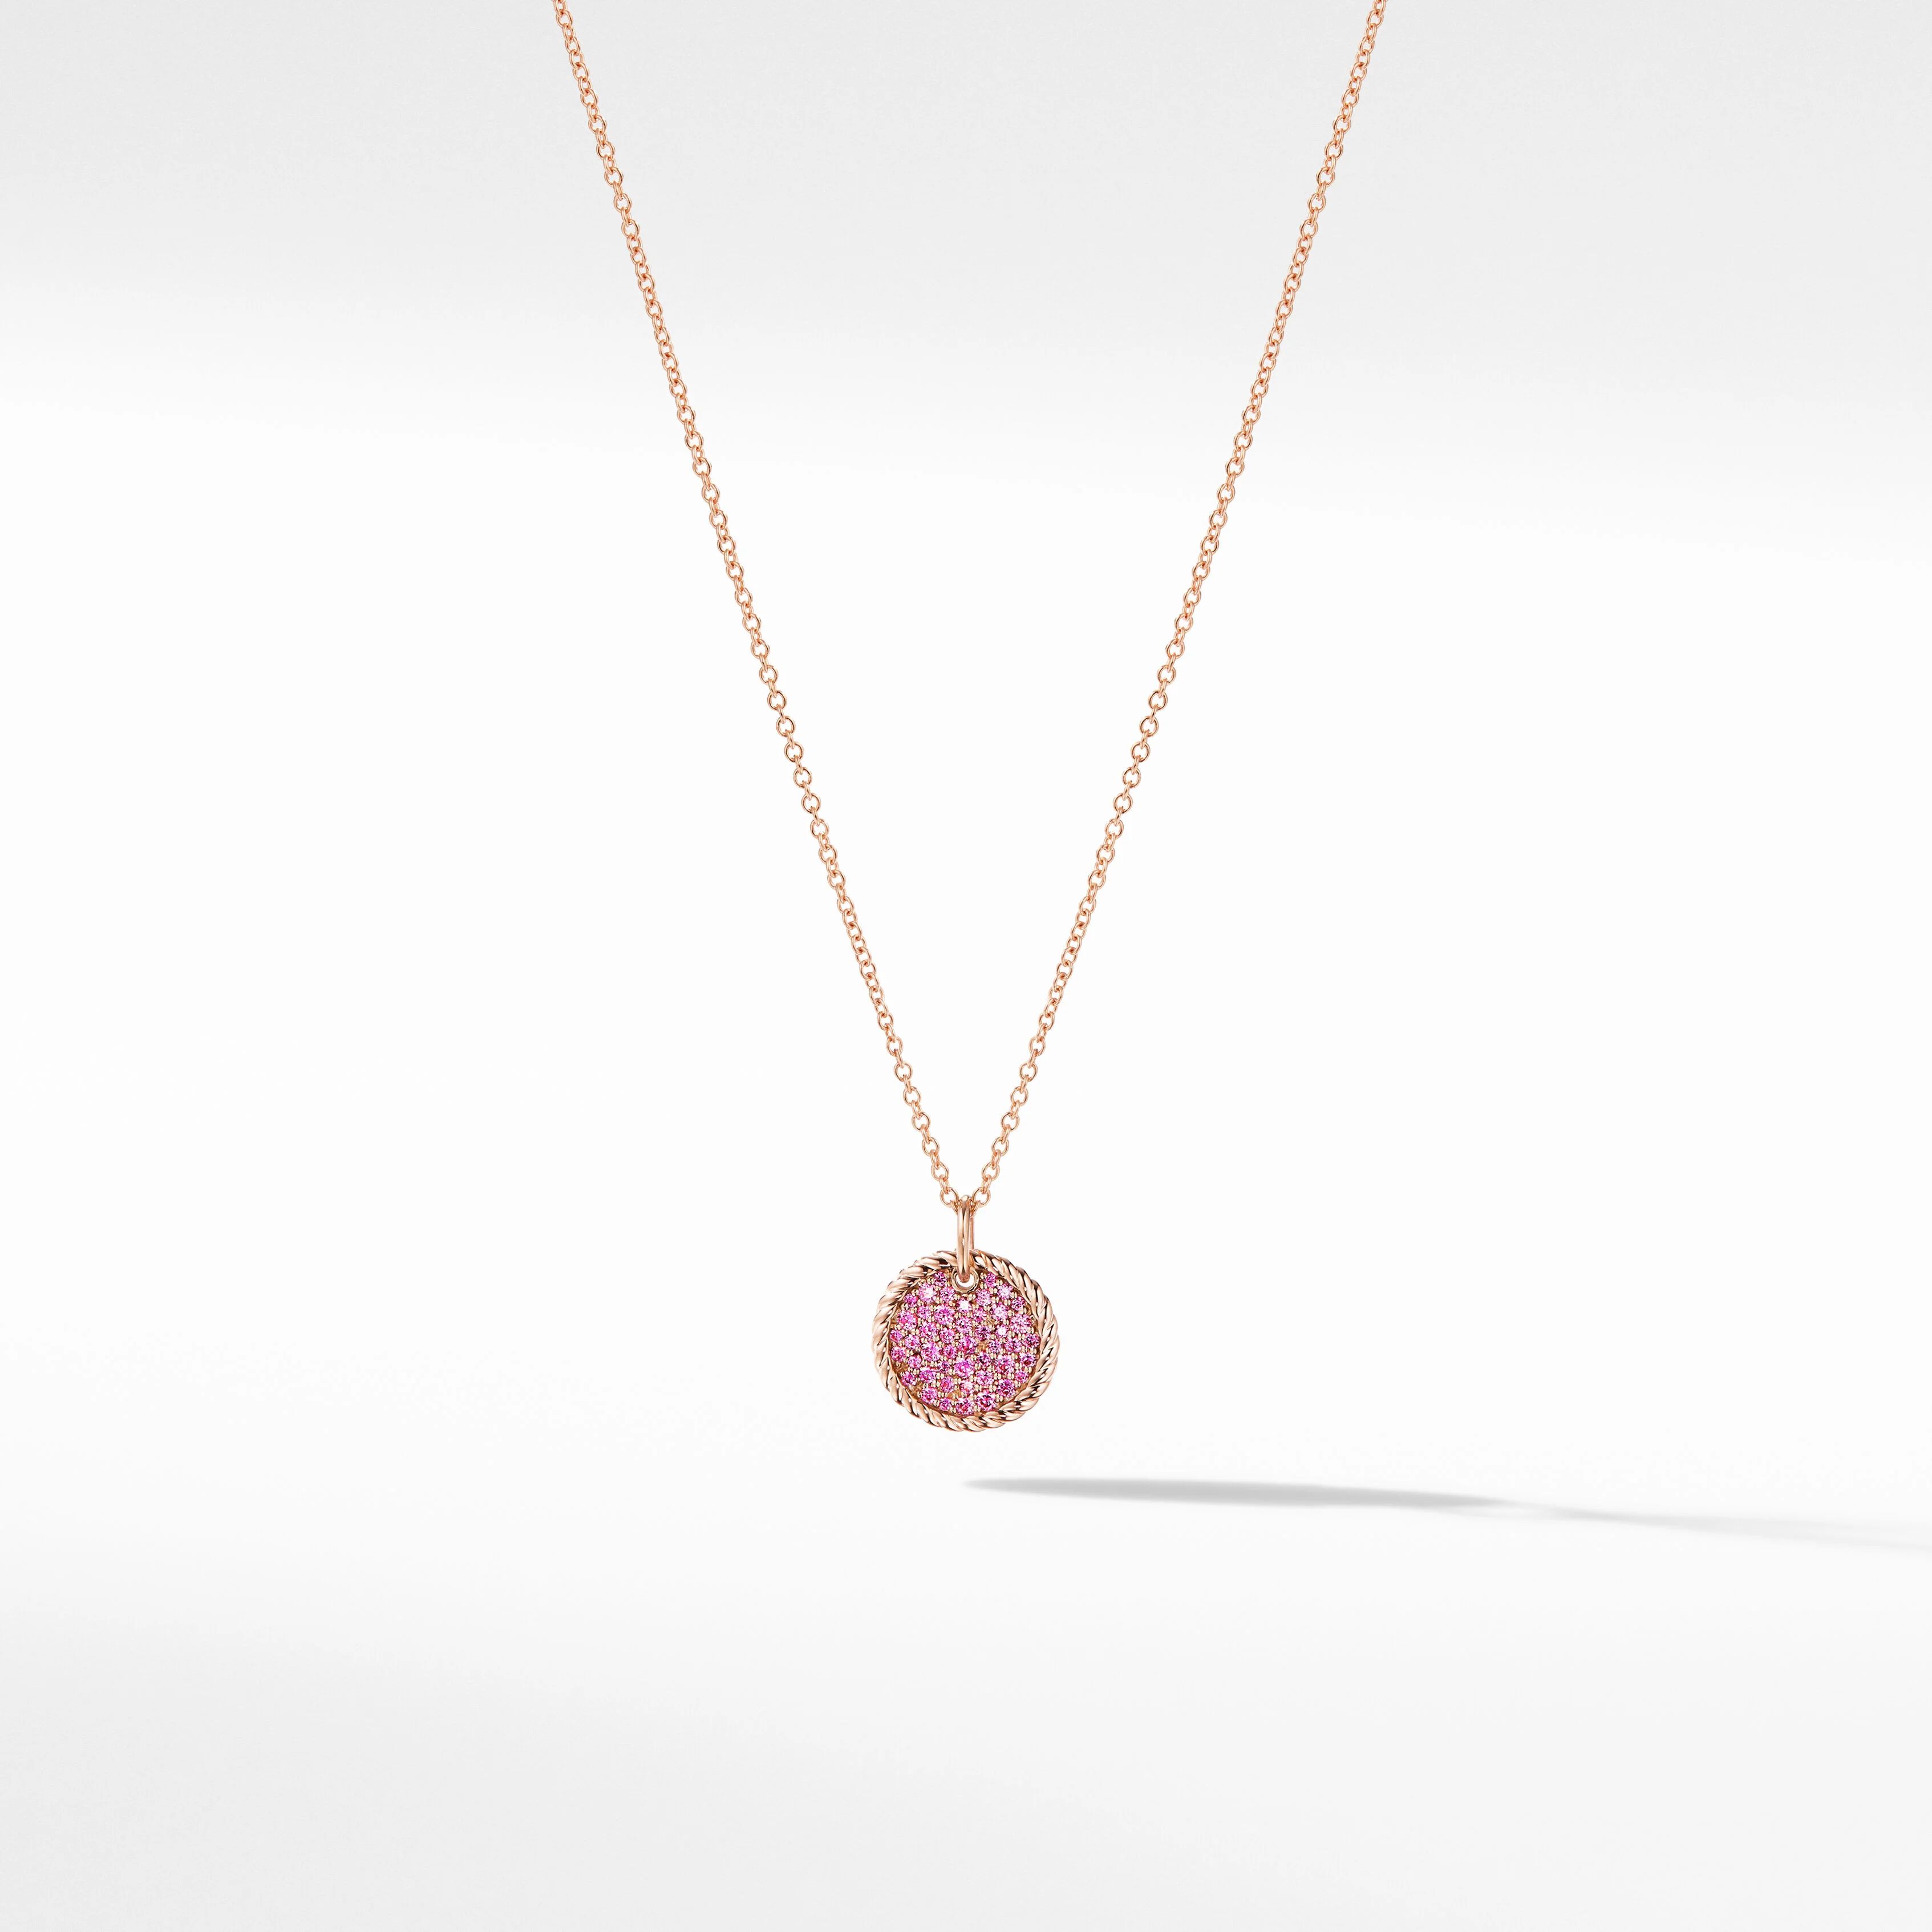 Cable Collectibles® Pavé Plate Necklace in 18K Rose Gold with Pink Sapphires | David Yurman